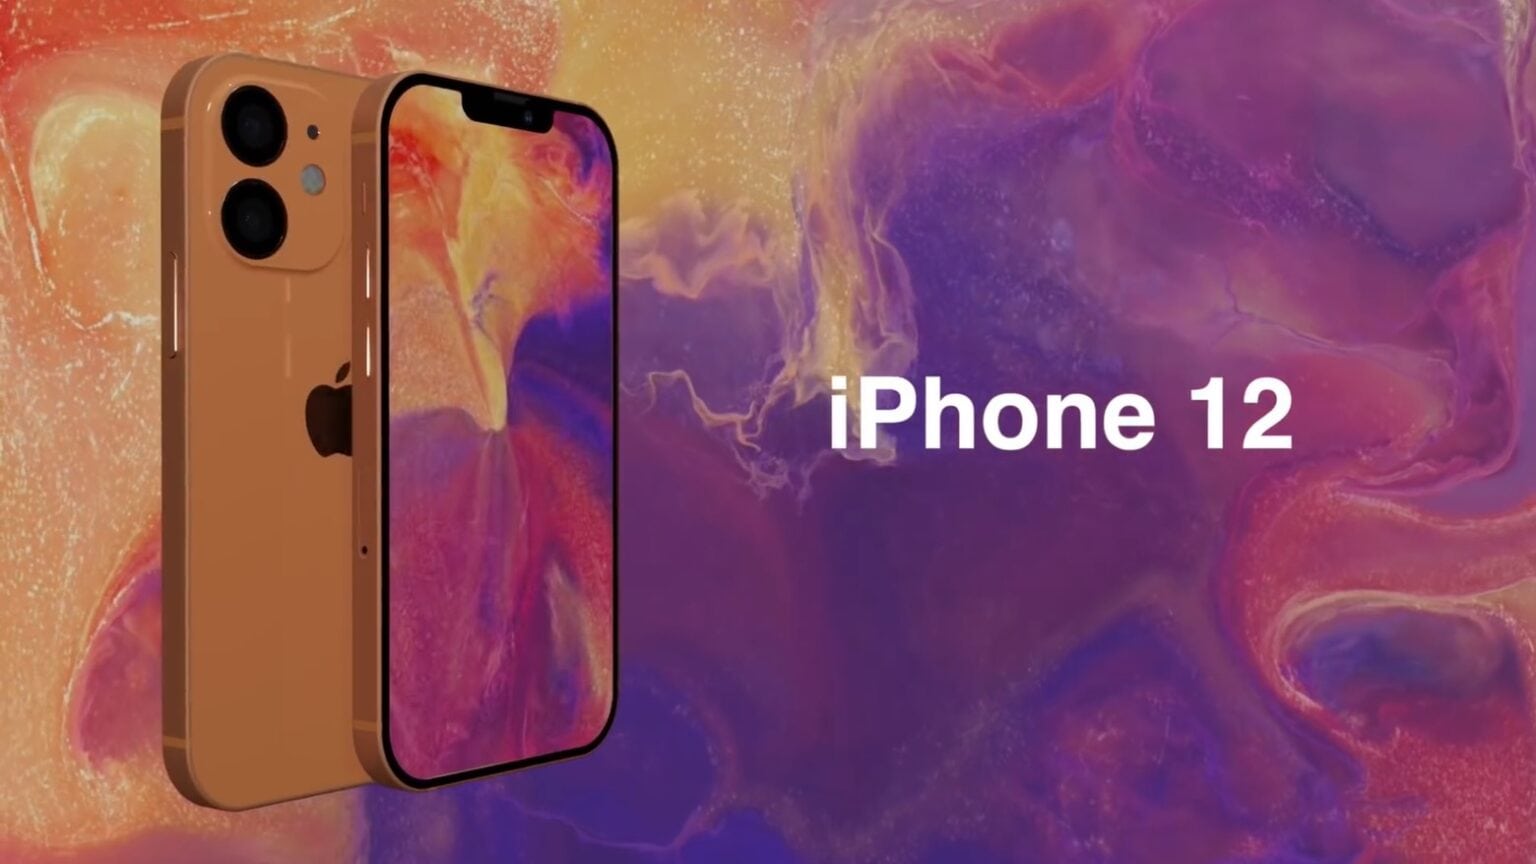 iPhone 12 rumors mix in this concept video.